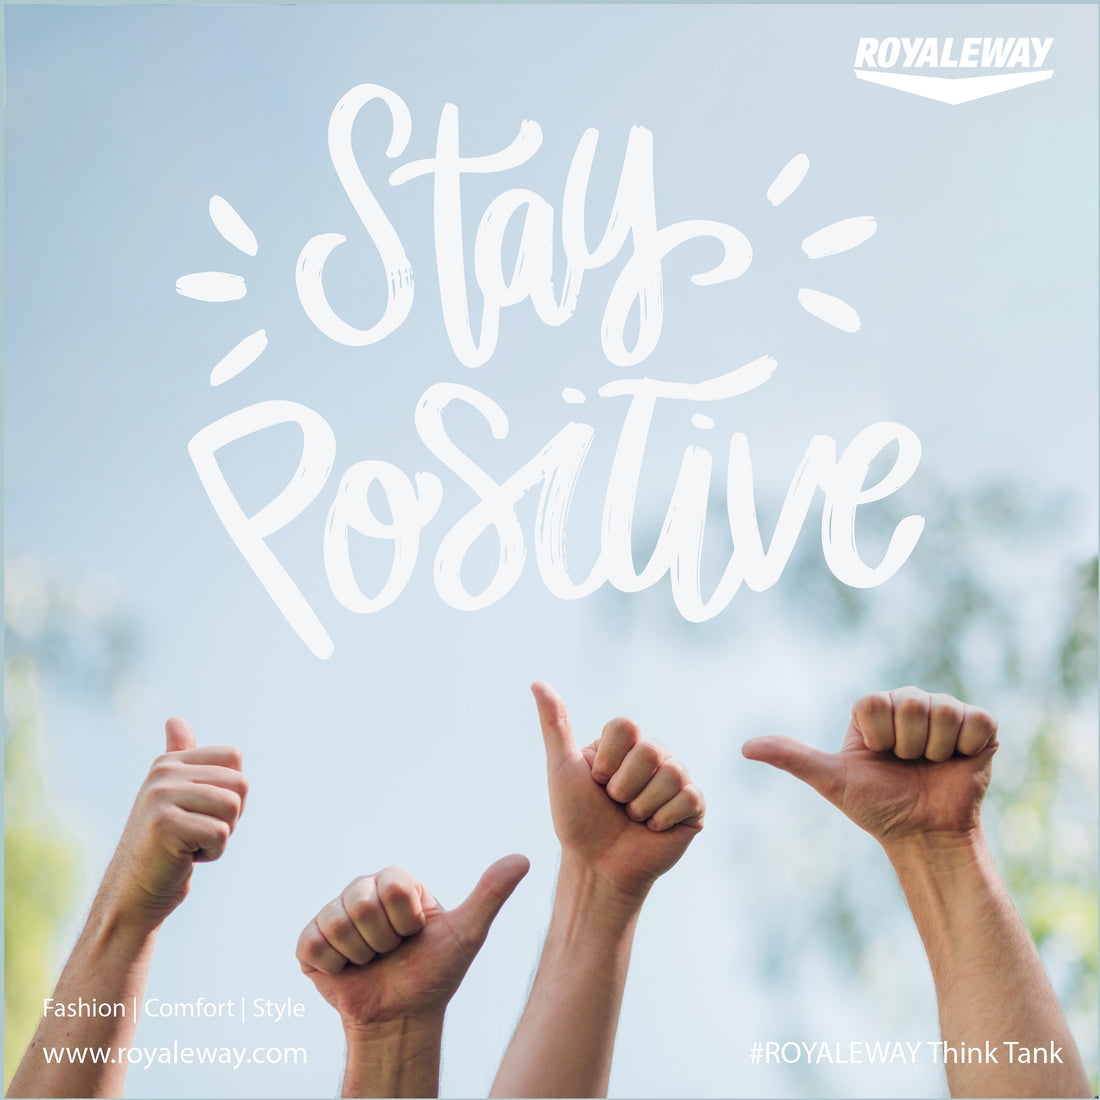 Stay Positive. ROYALEWAY Think Tank.